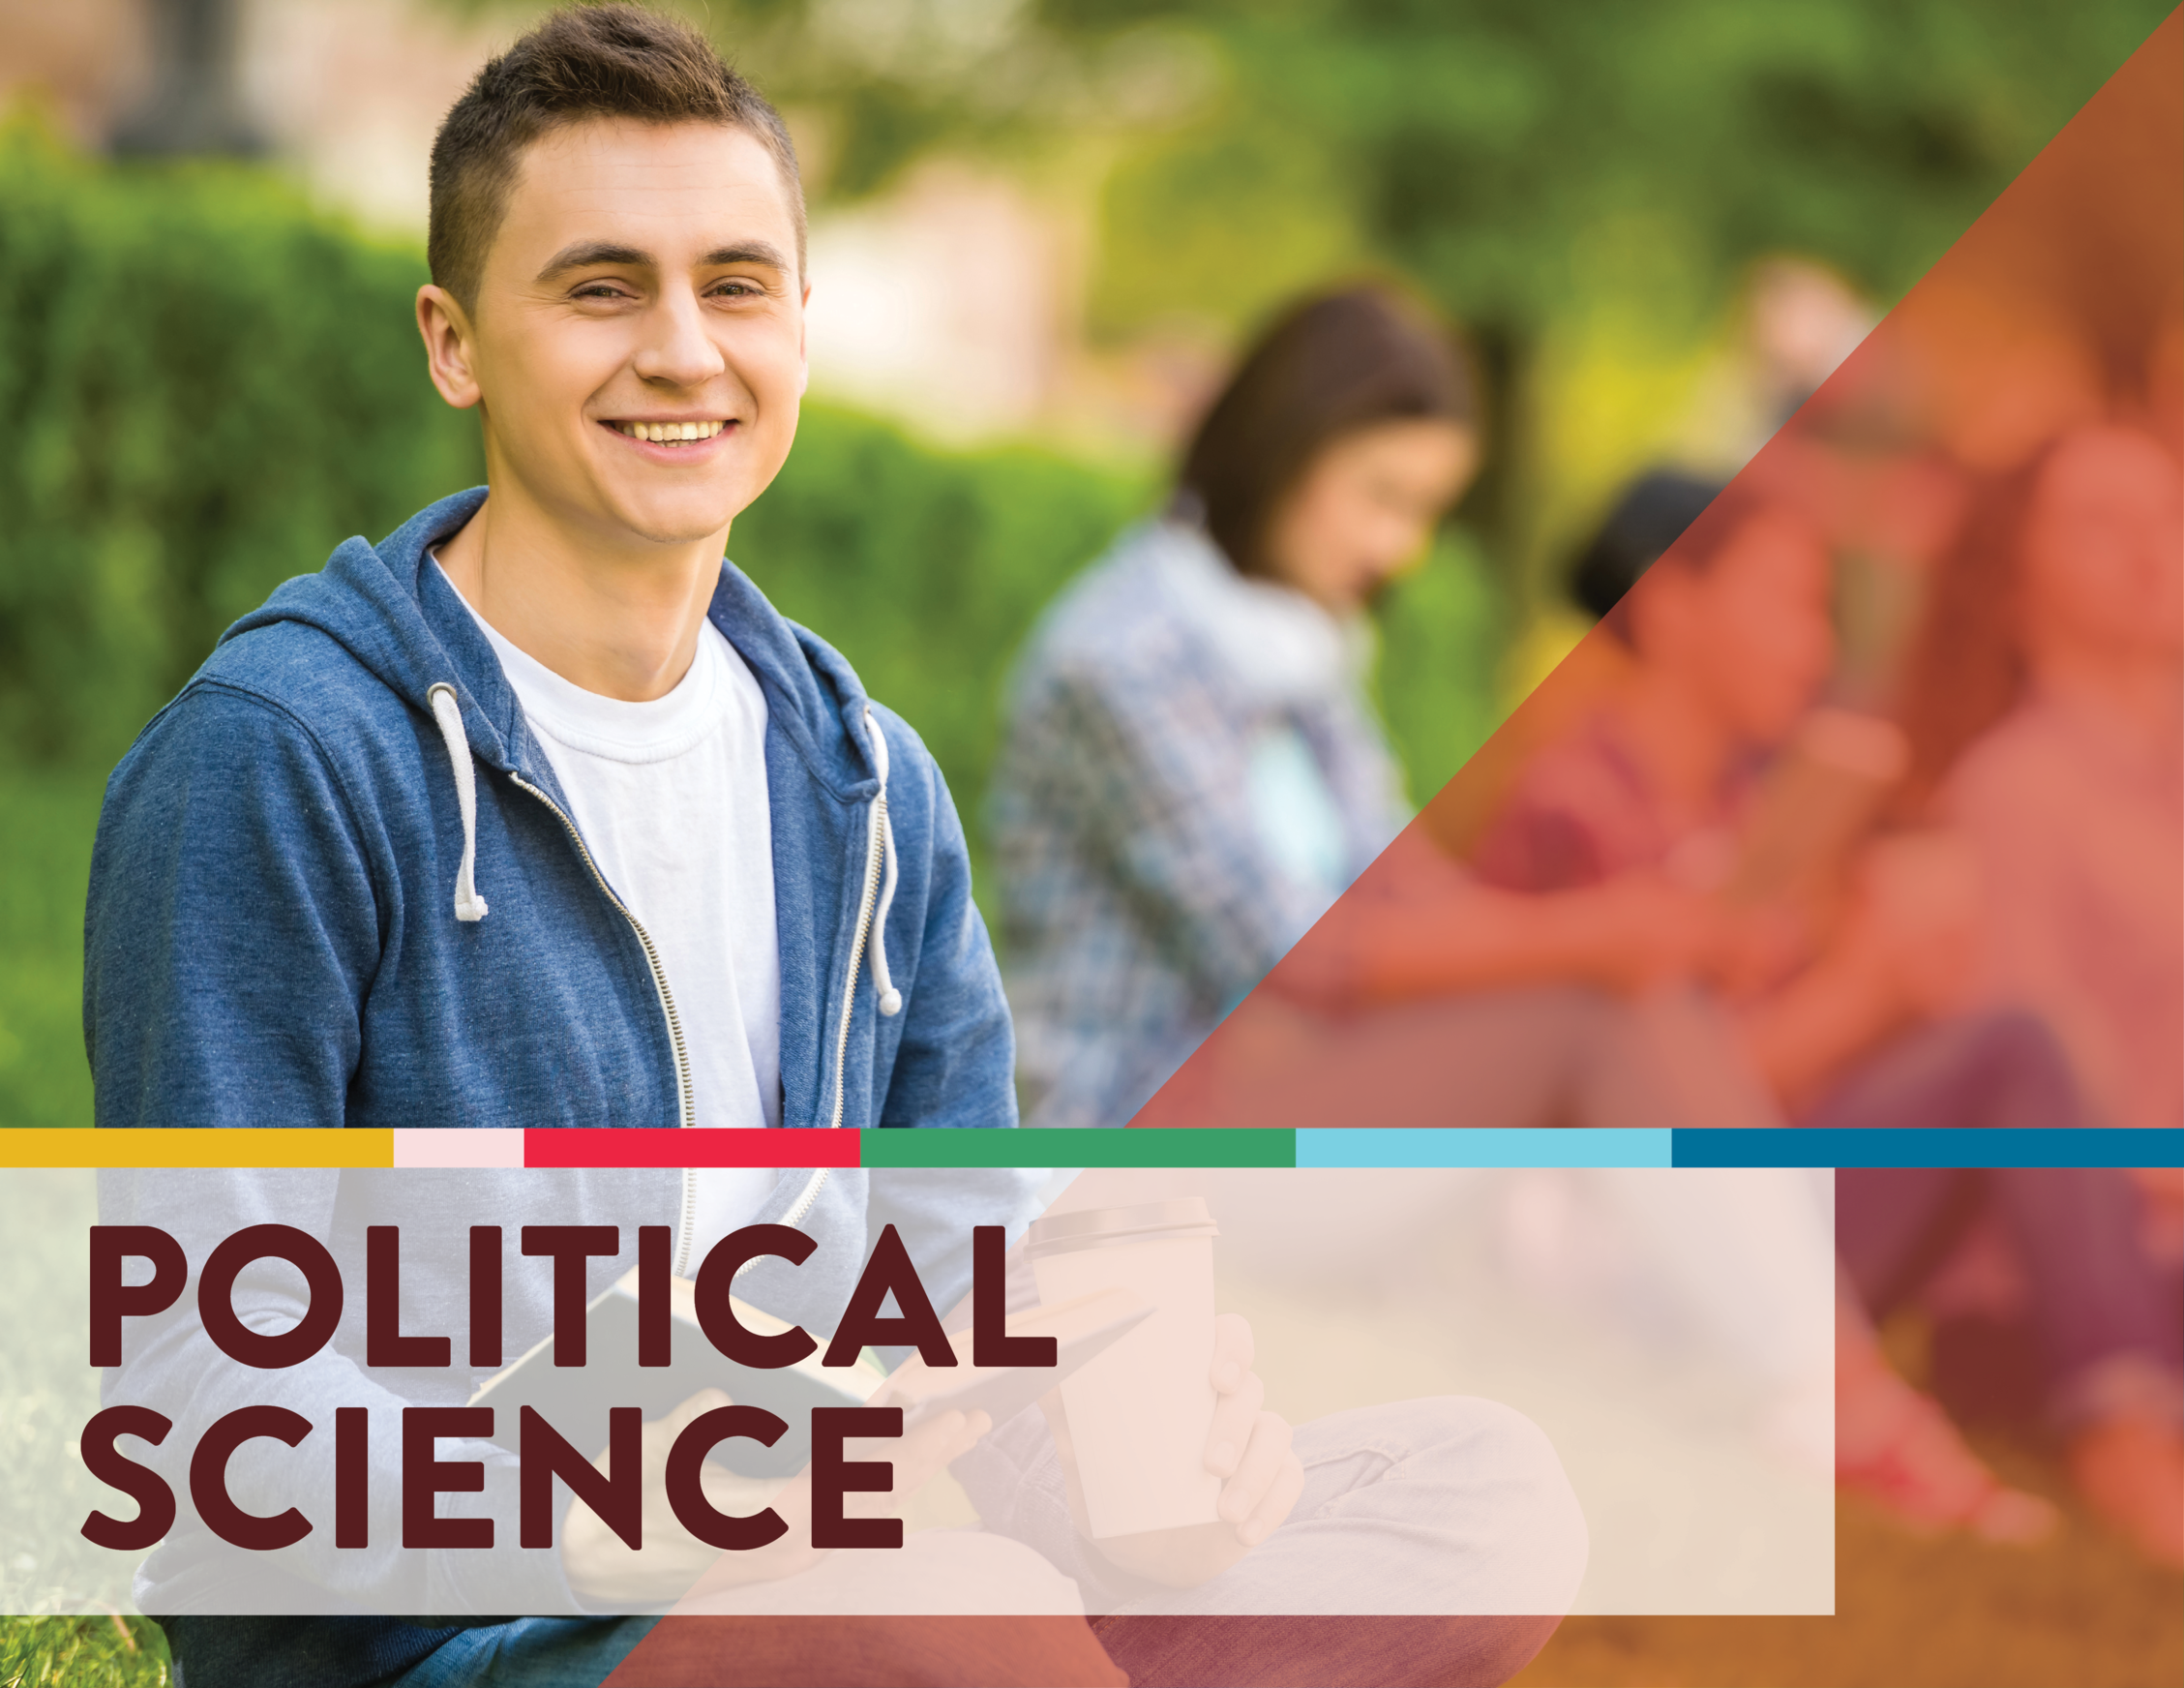 Please click the link to learn more about Political Science.